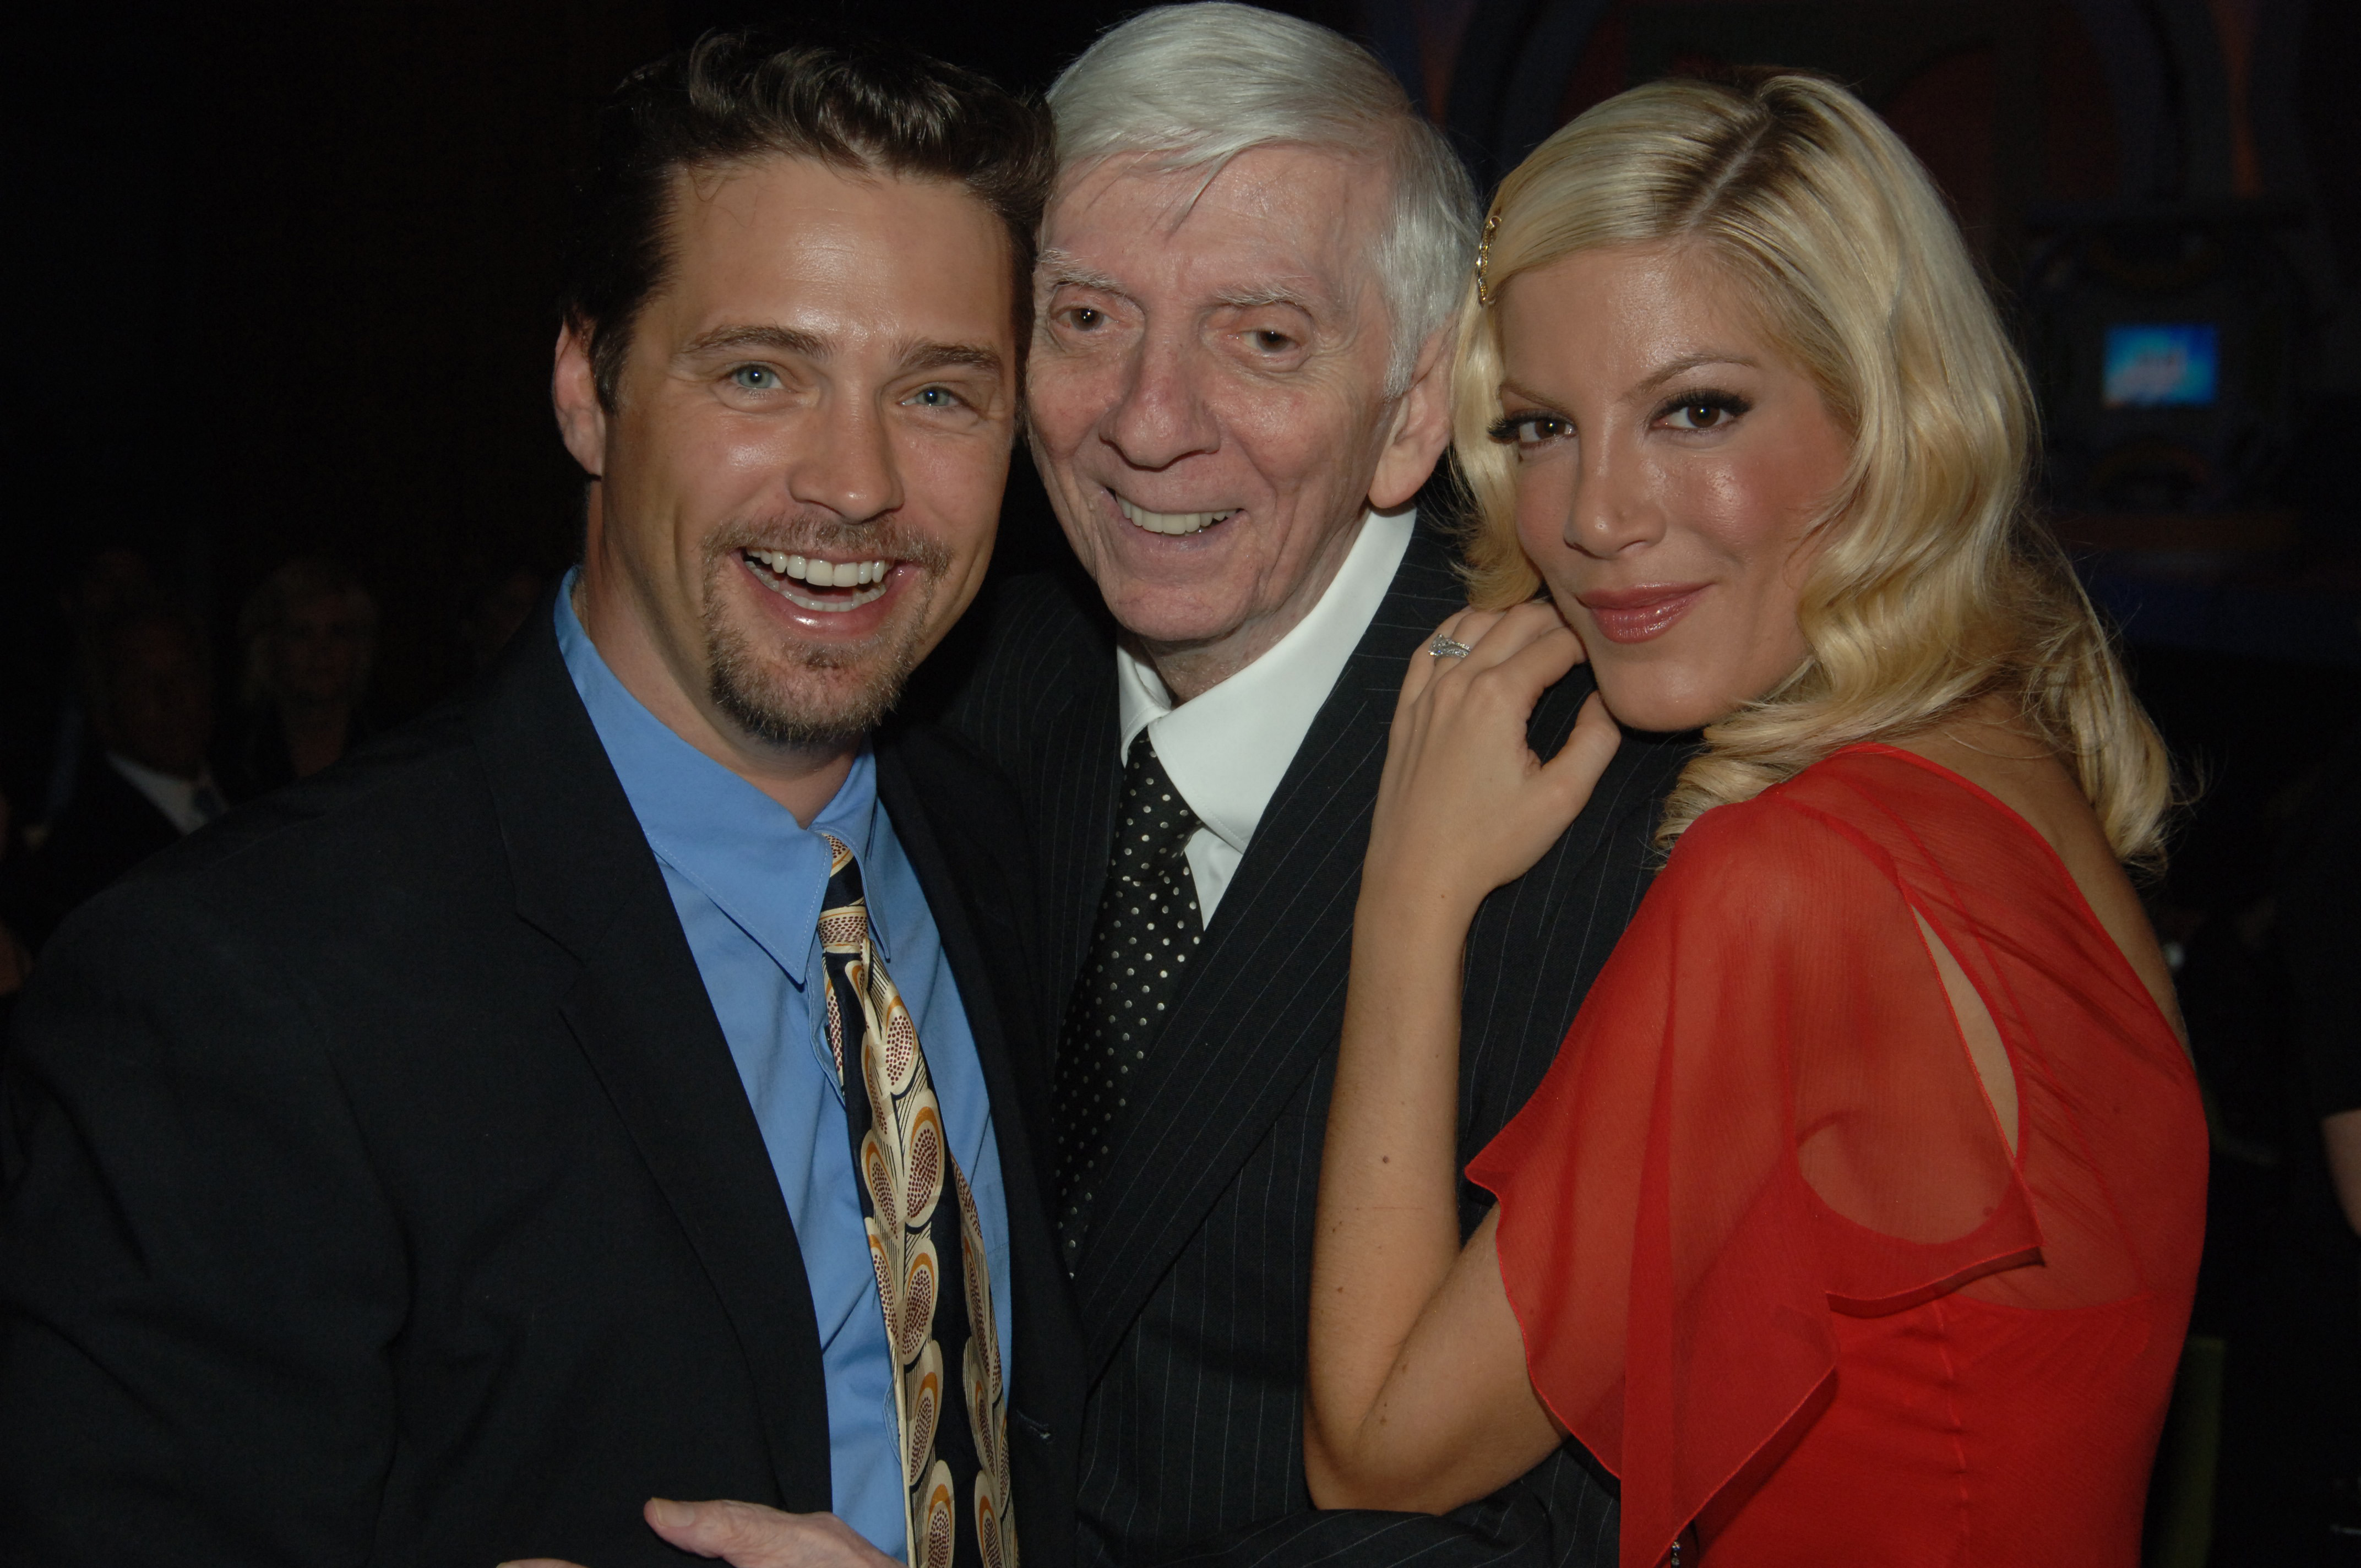 Jason Priestley, Aaron Spelling, and Tori Spelling at Barker Hangar in Santa Monica, California, on March 13, 2005 | Source: Getty Images